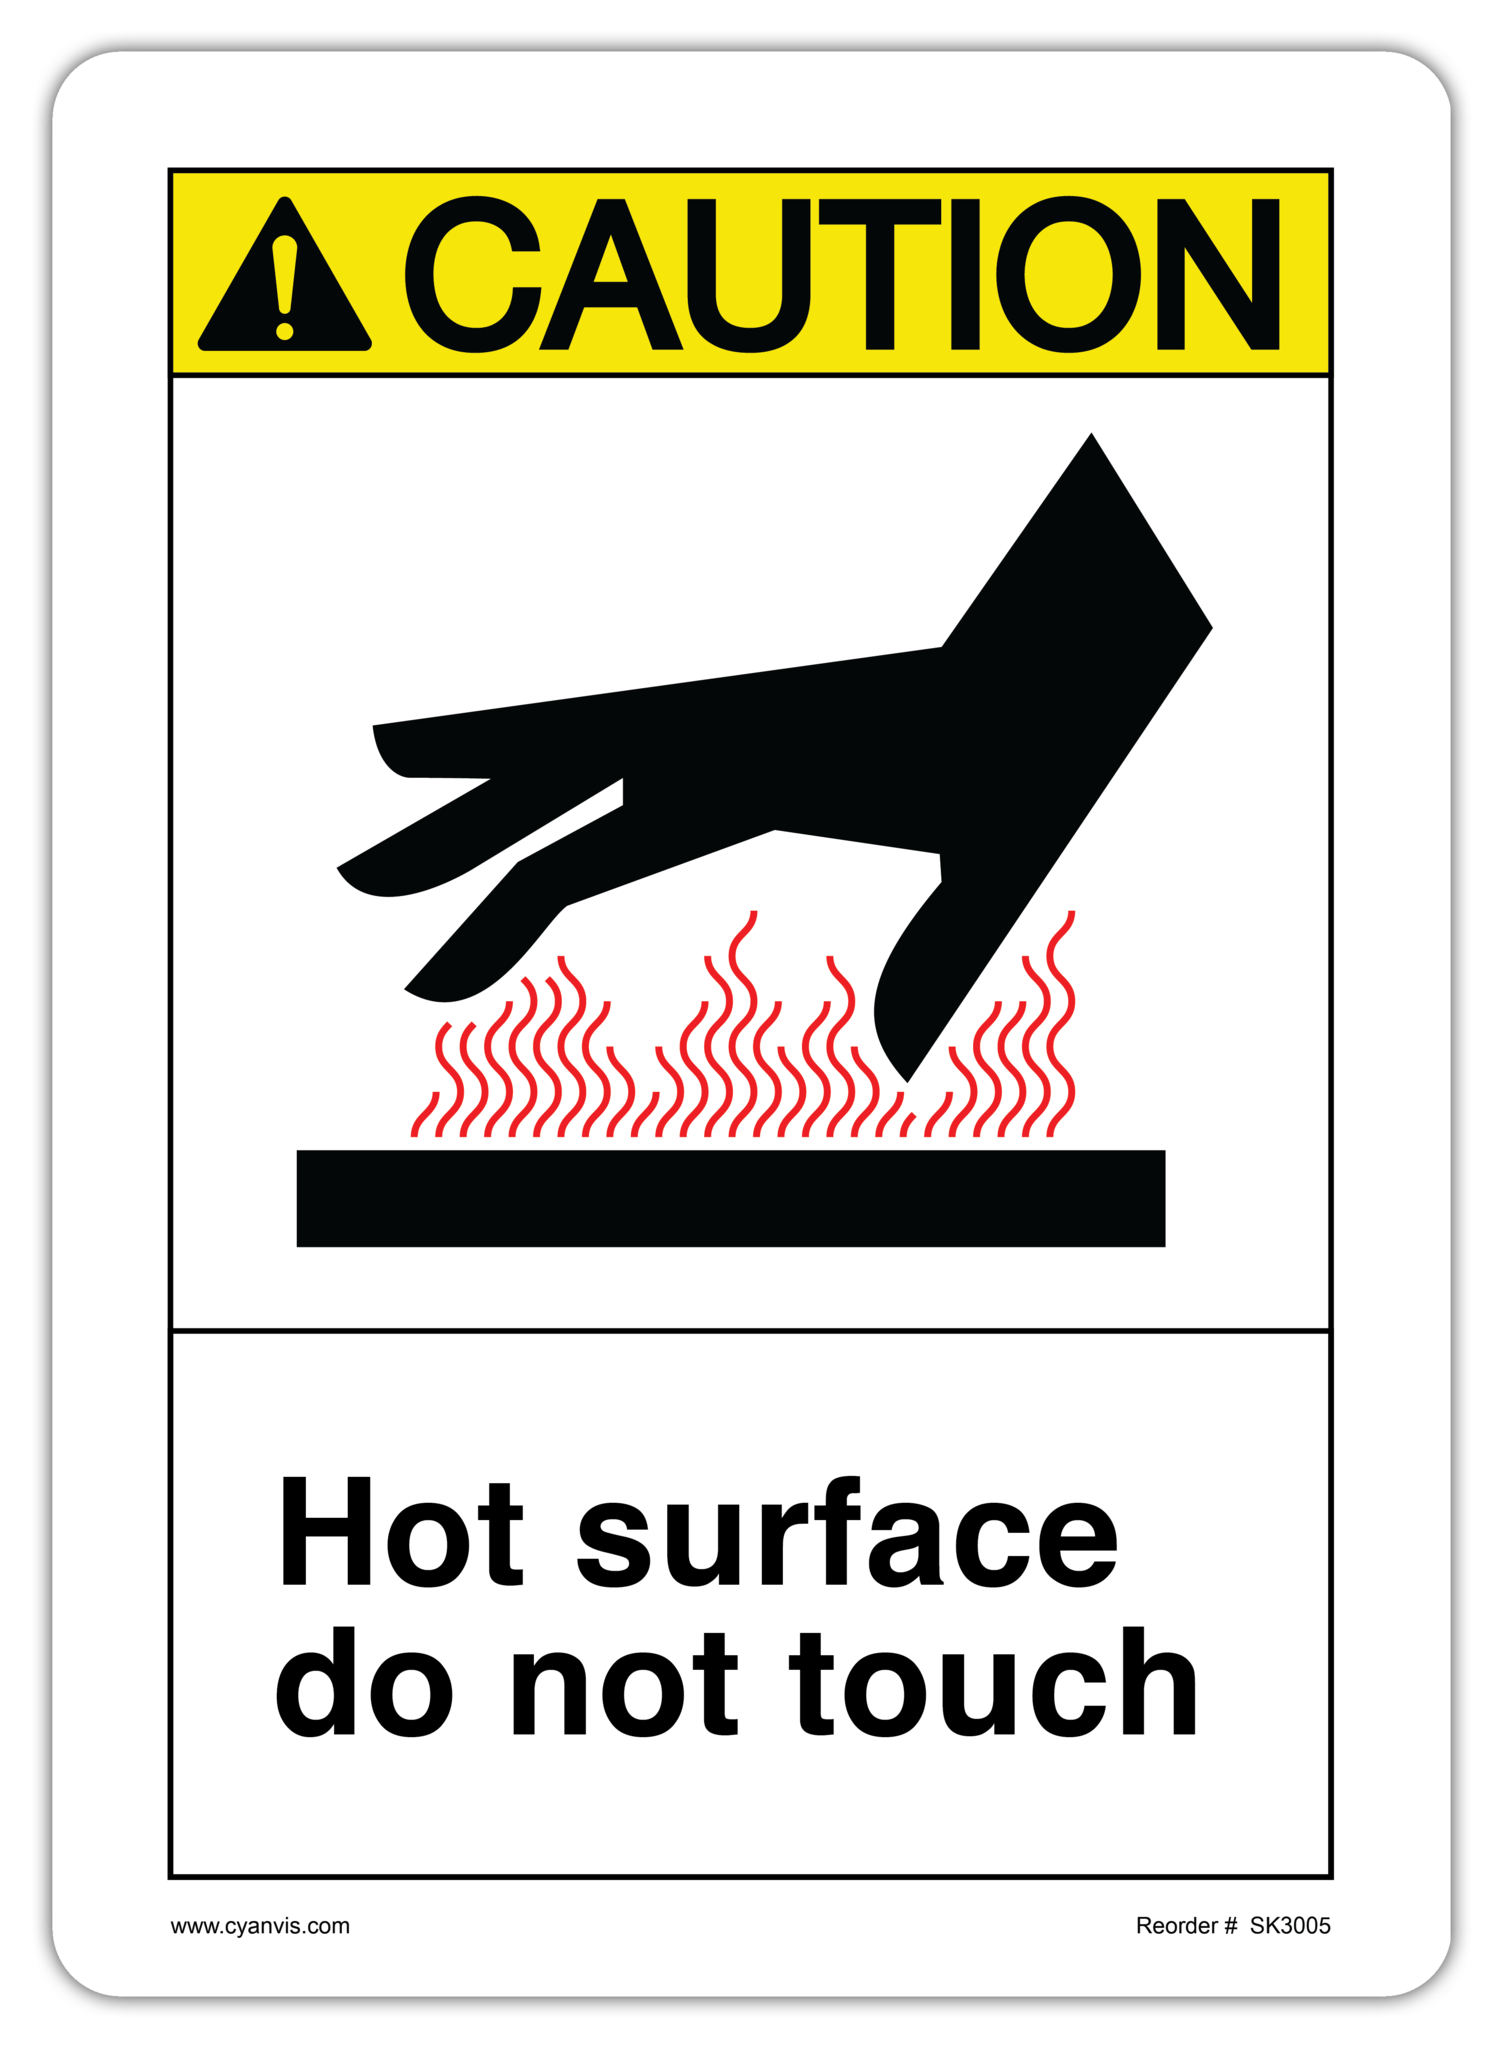 Safety Sign: ASNI - Caution - HOT SURFACE DO NOT TOUCH - CYANvisuals